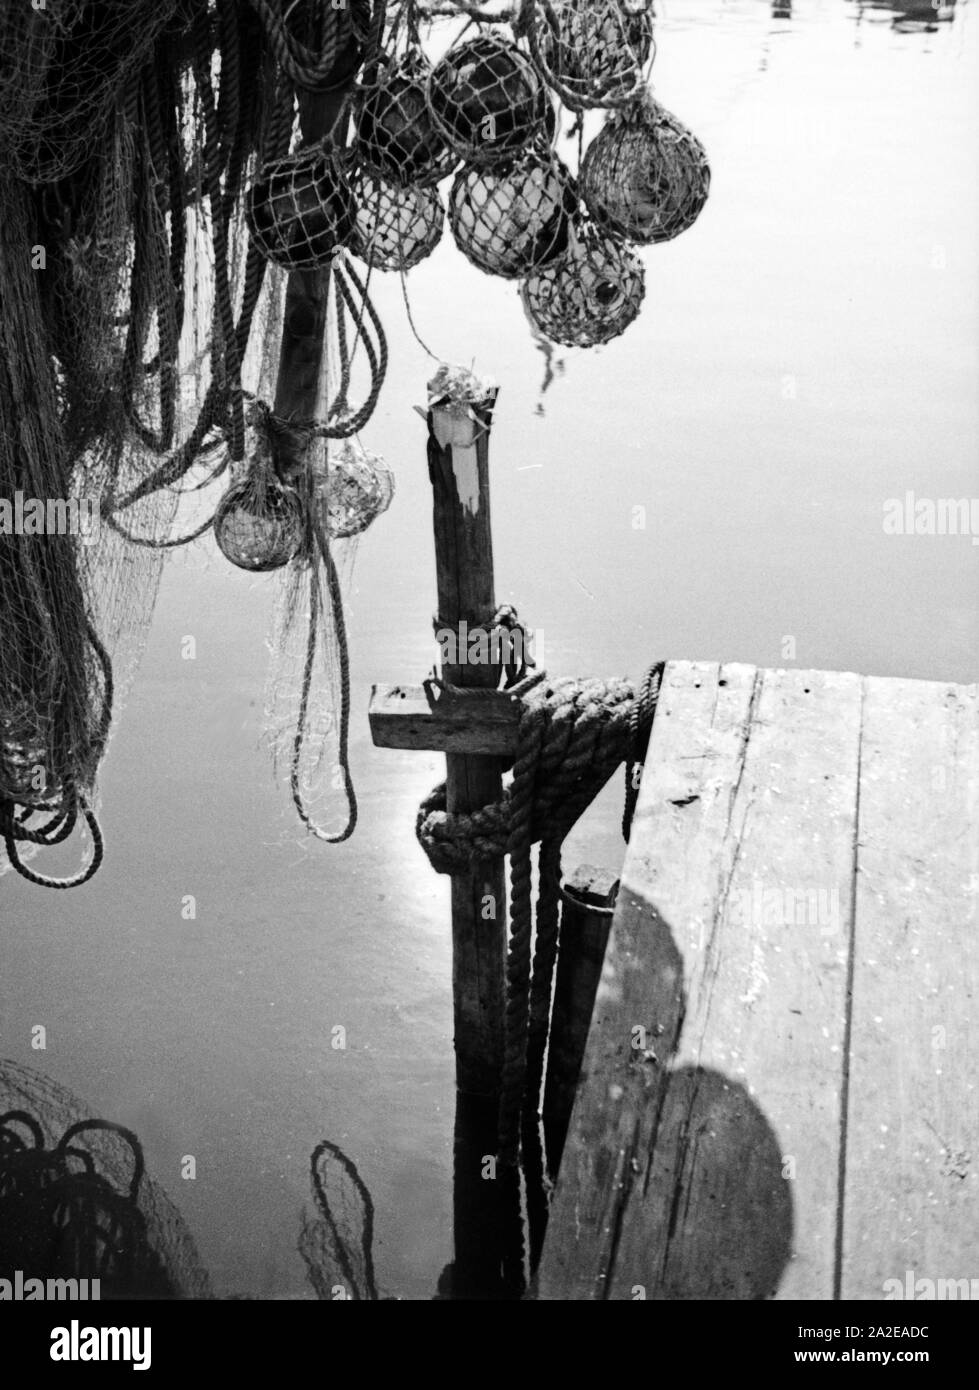 Fisherman net Black and White Stock Photos & Images - Alamy